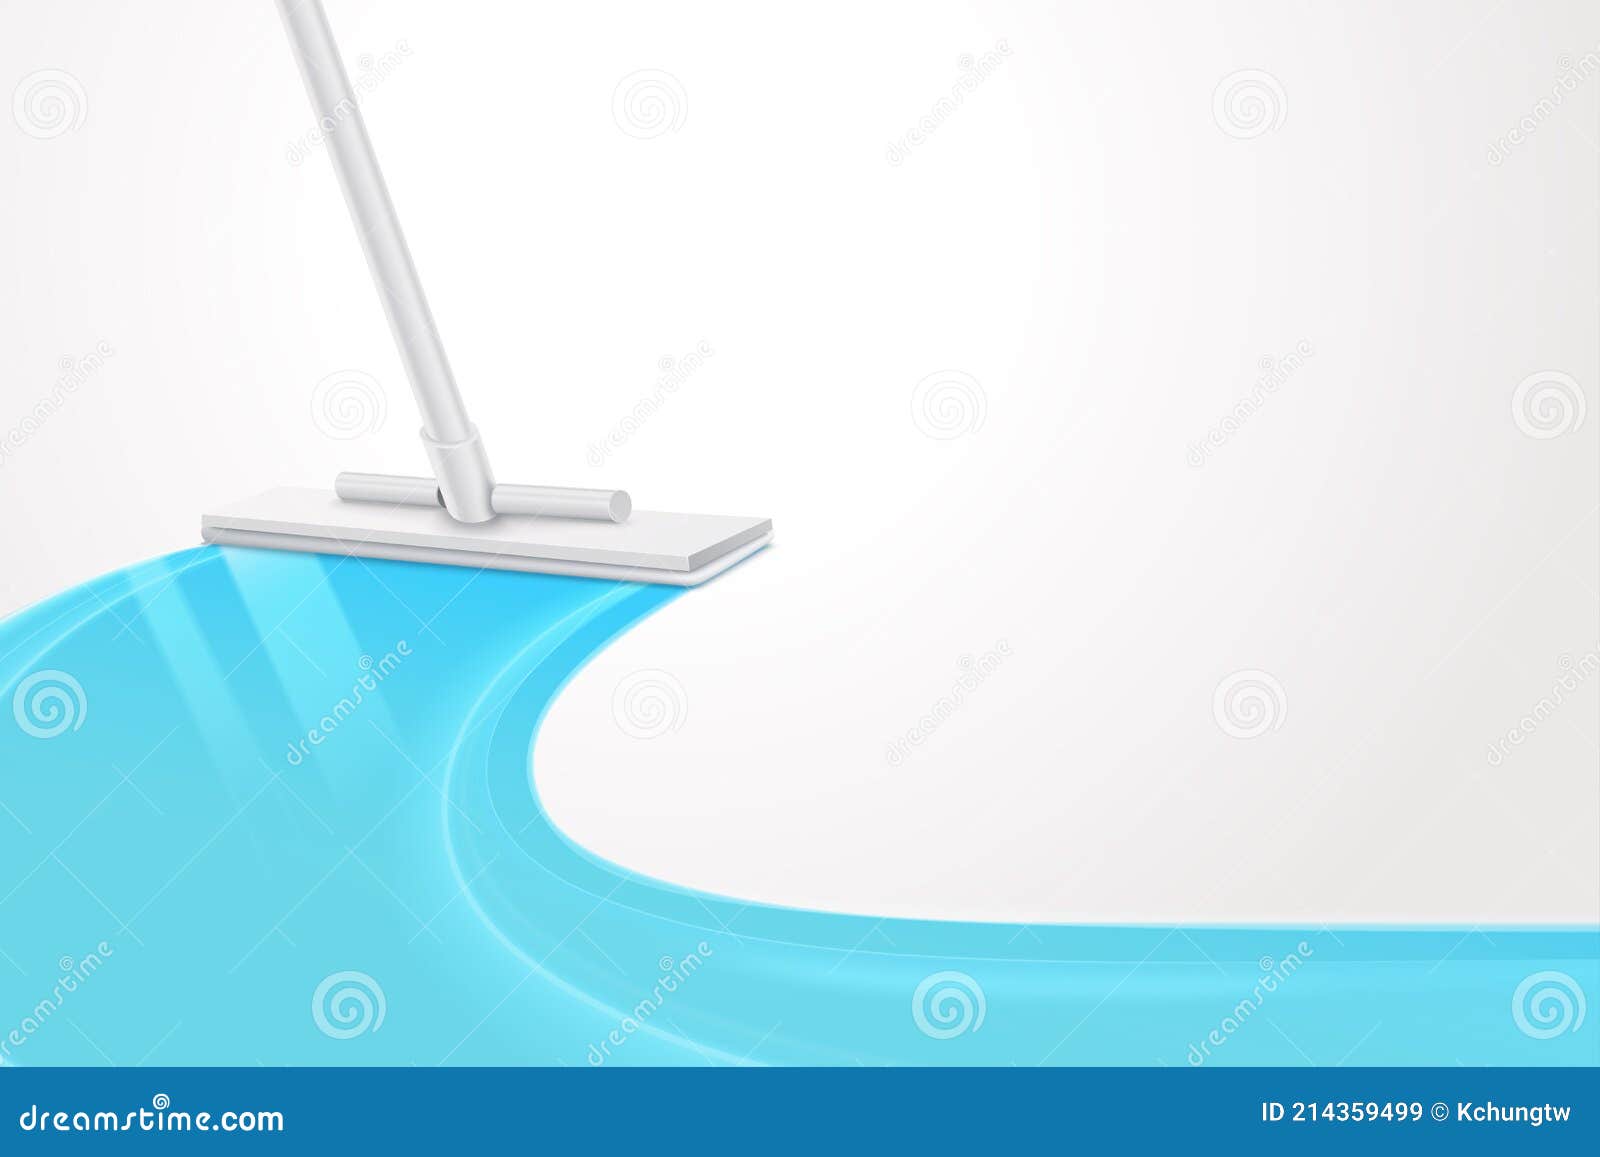 Mop cleaning surface stock vector. Illustration of fresh - 214359499